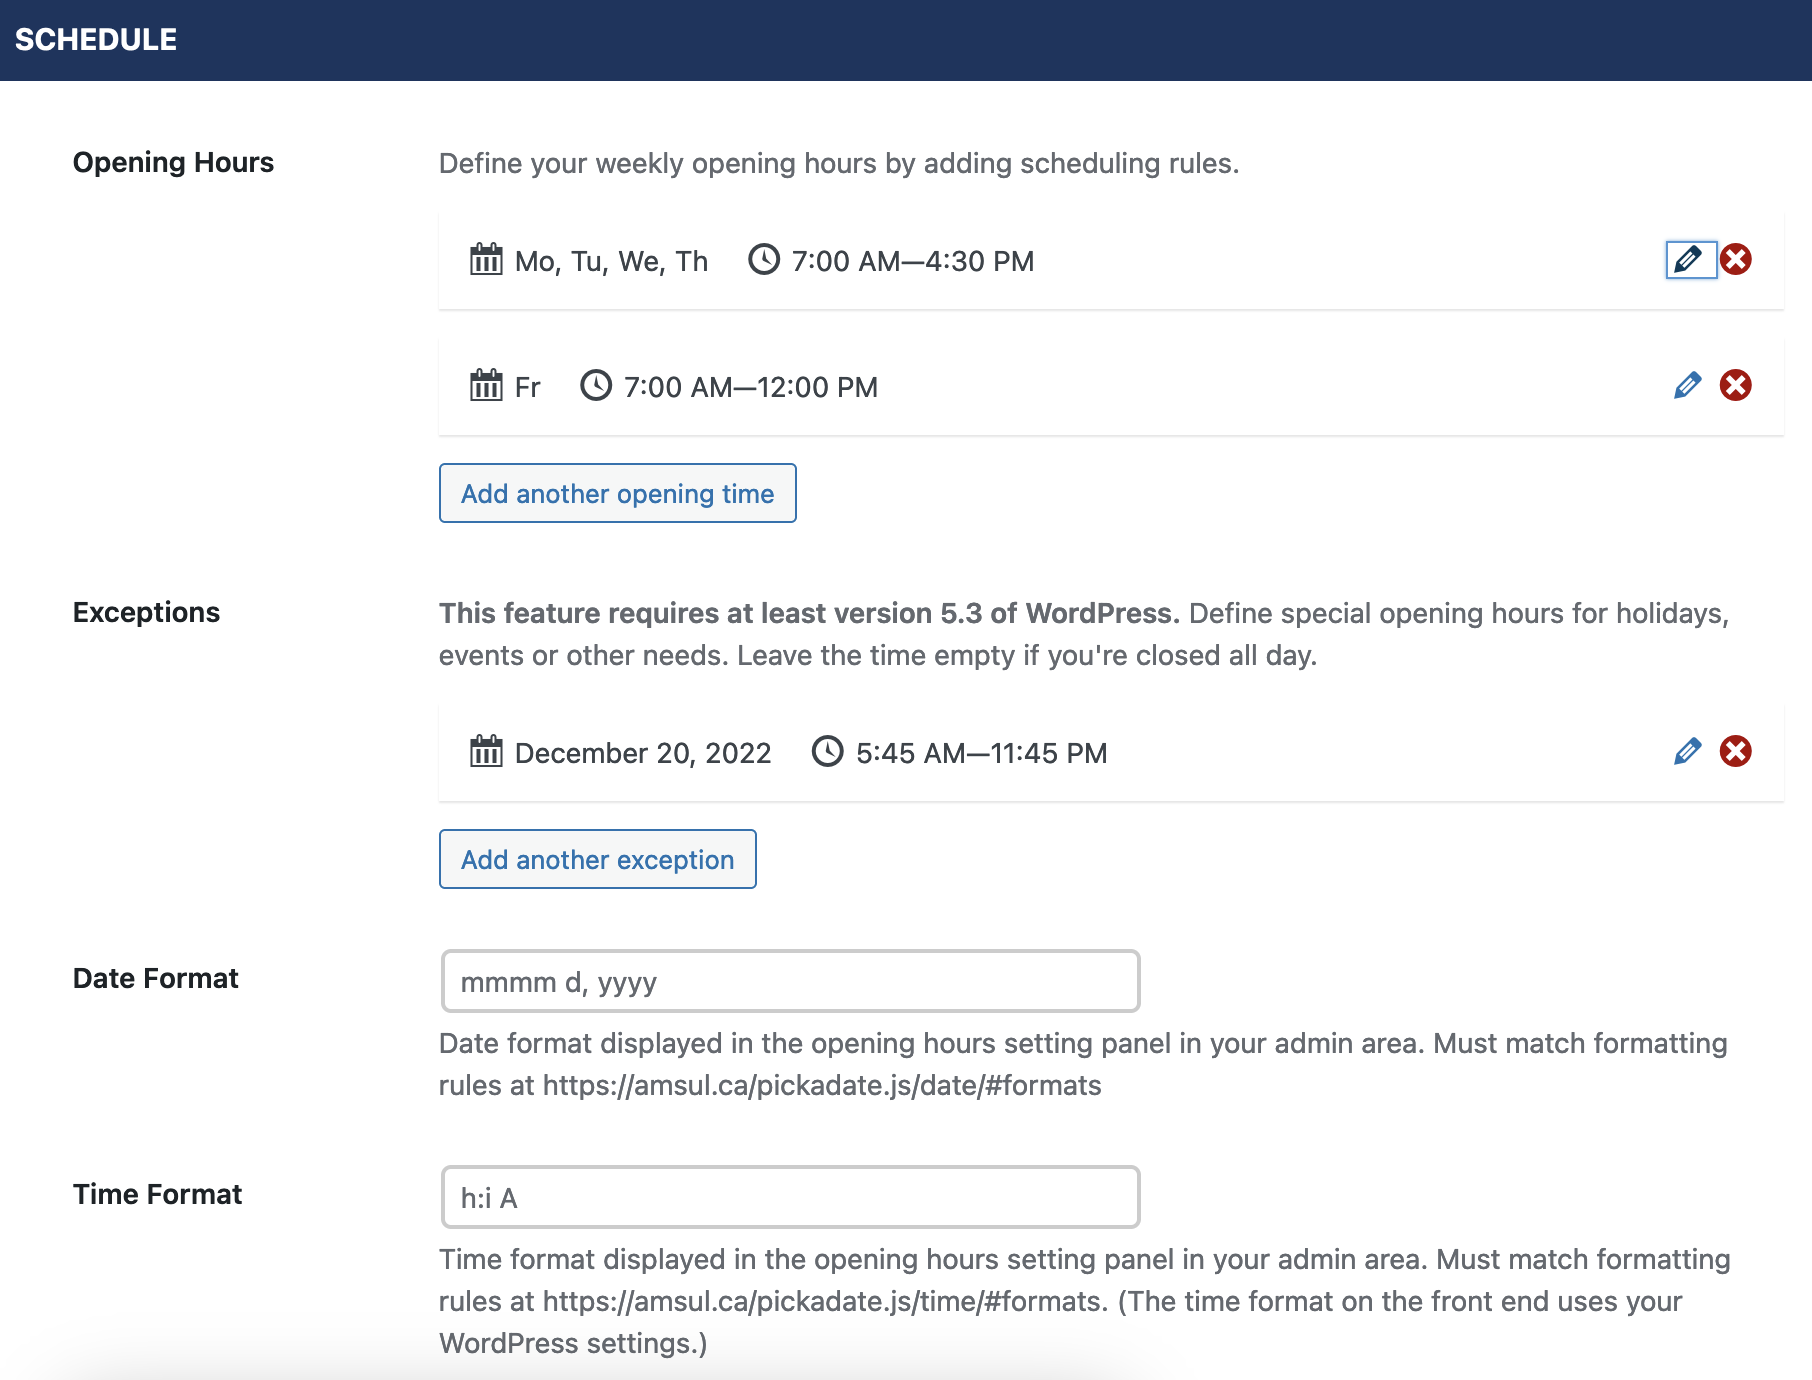 Screenshot of the schedule settings page